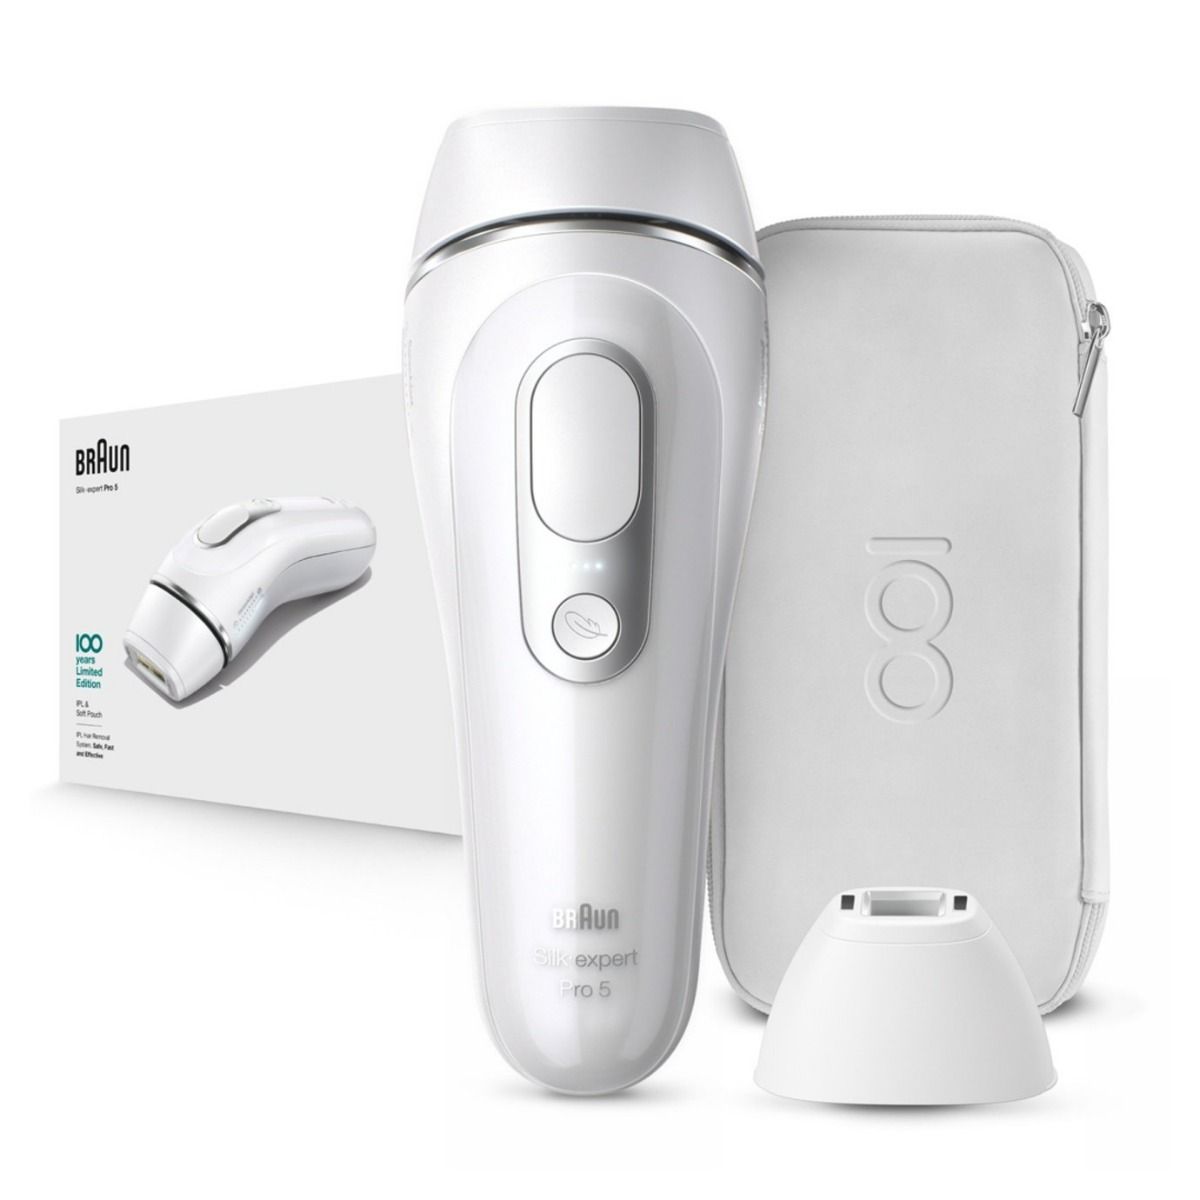 Braun Silk-expert Pro 5 IPL Hair Removal , White - MBSEP5, Best price in  Egypt